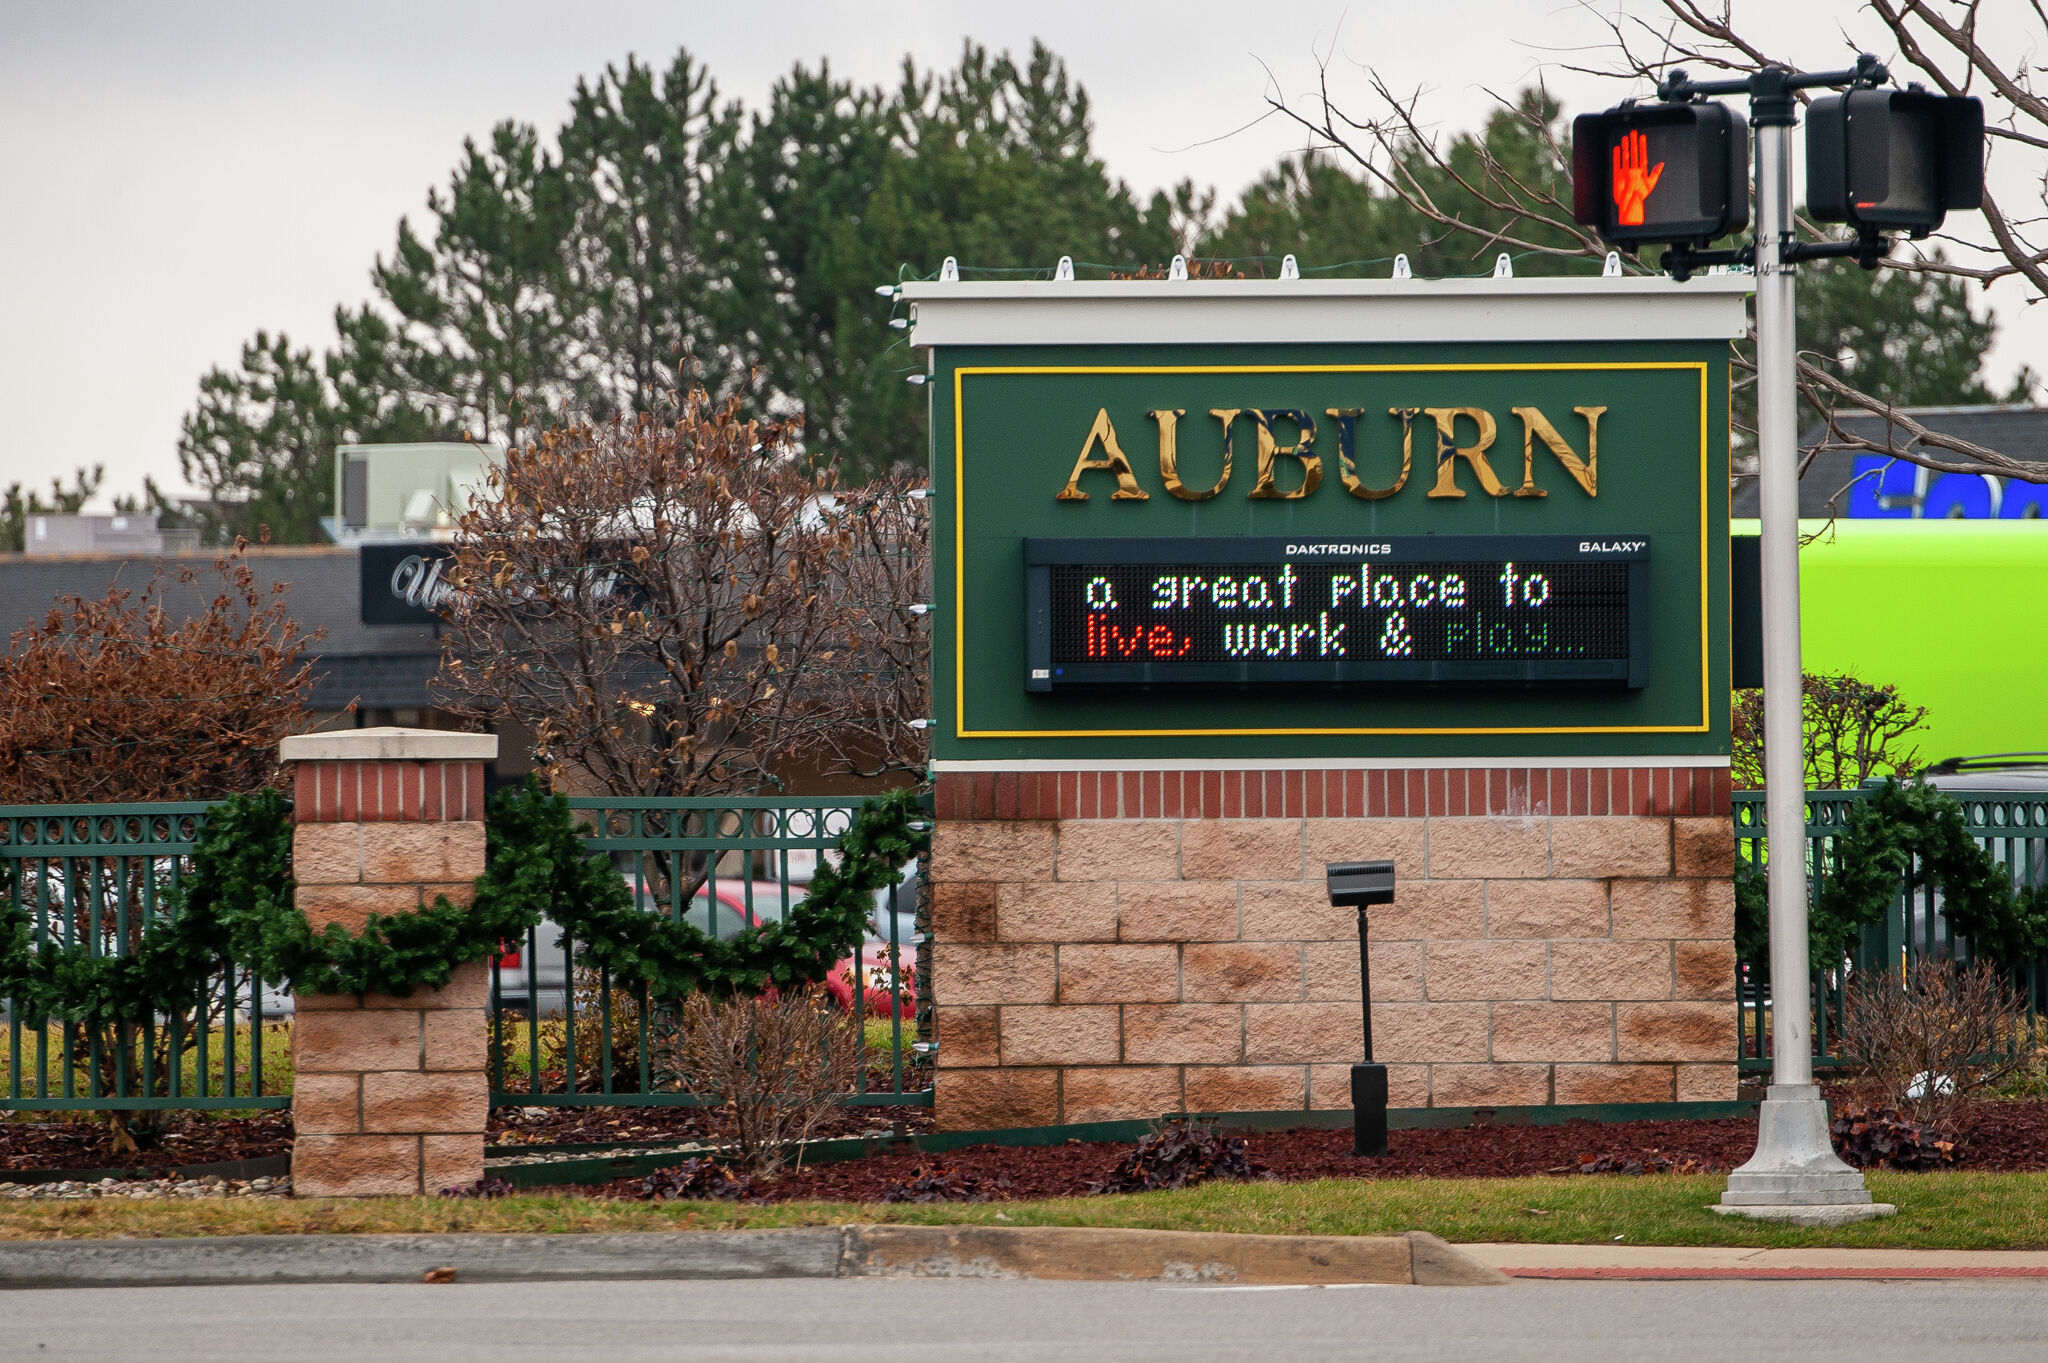 Auburn park gets new playgrounds, adult fitness/physical therapy area